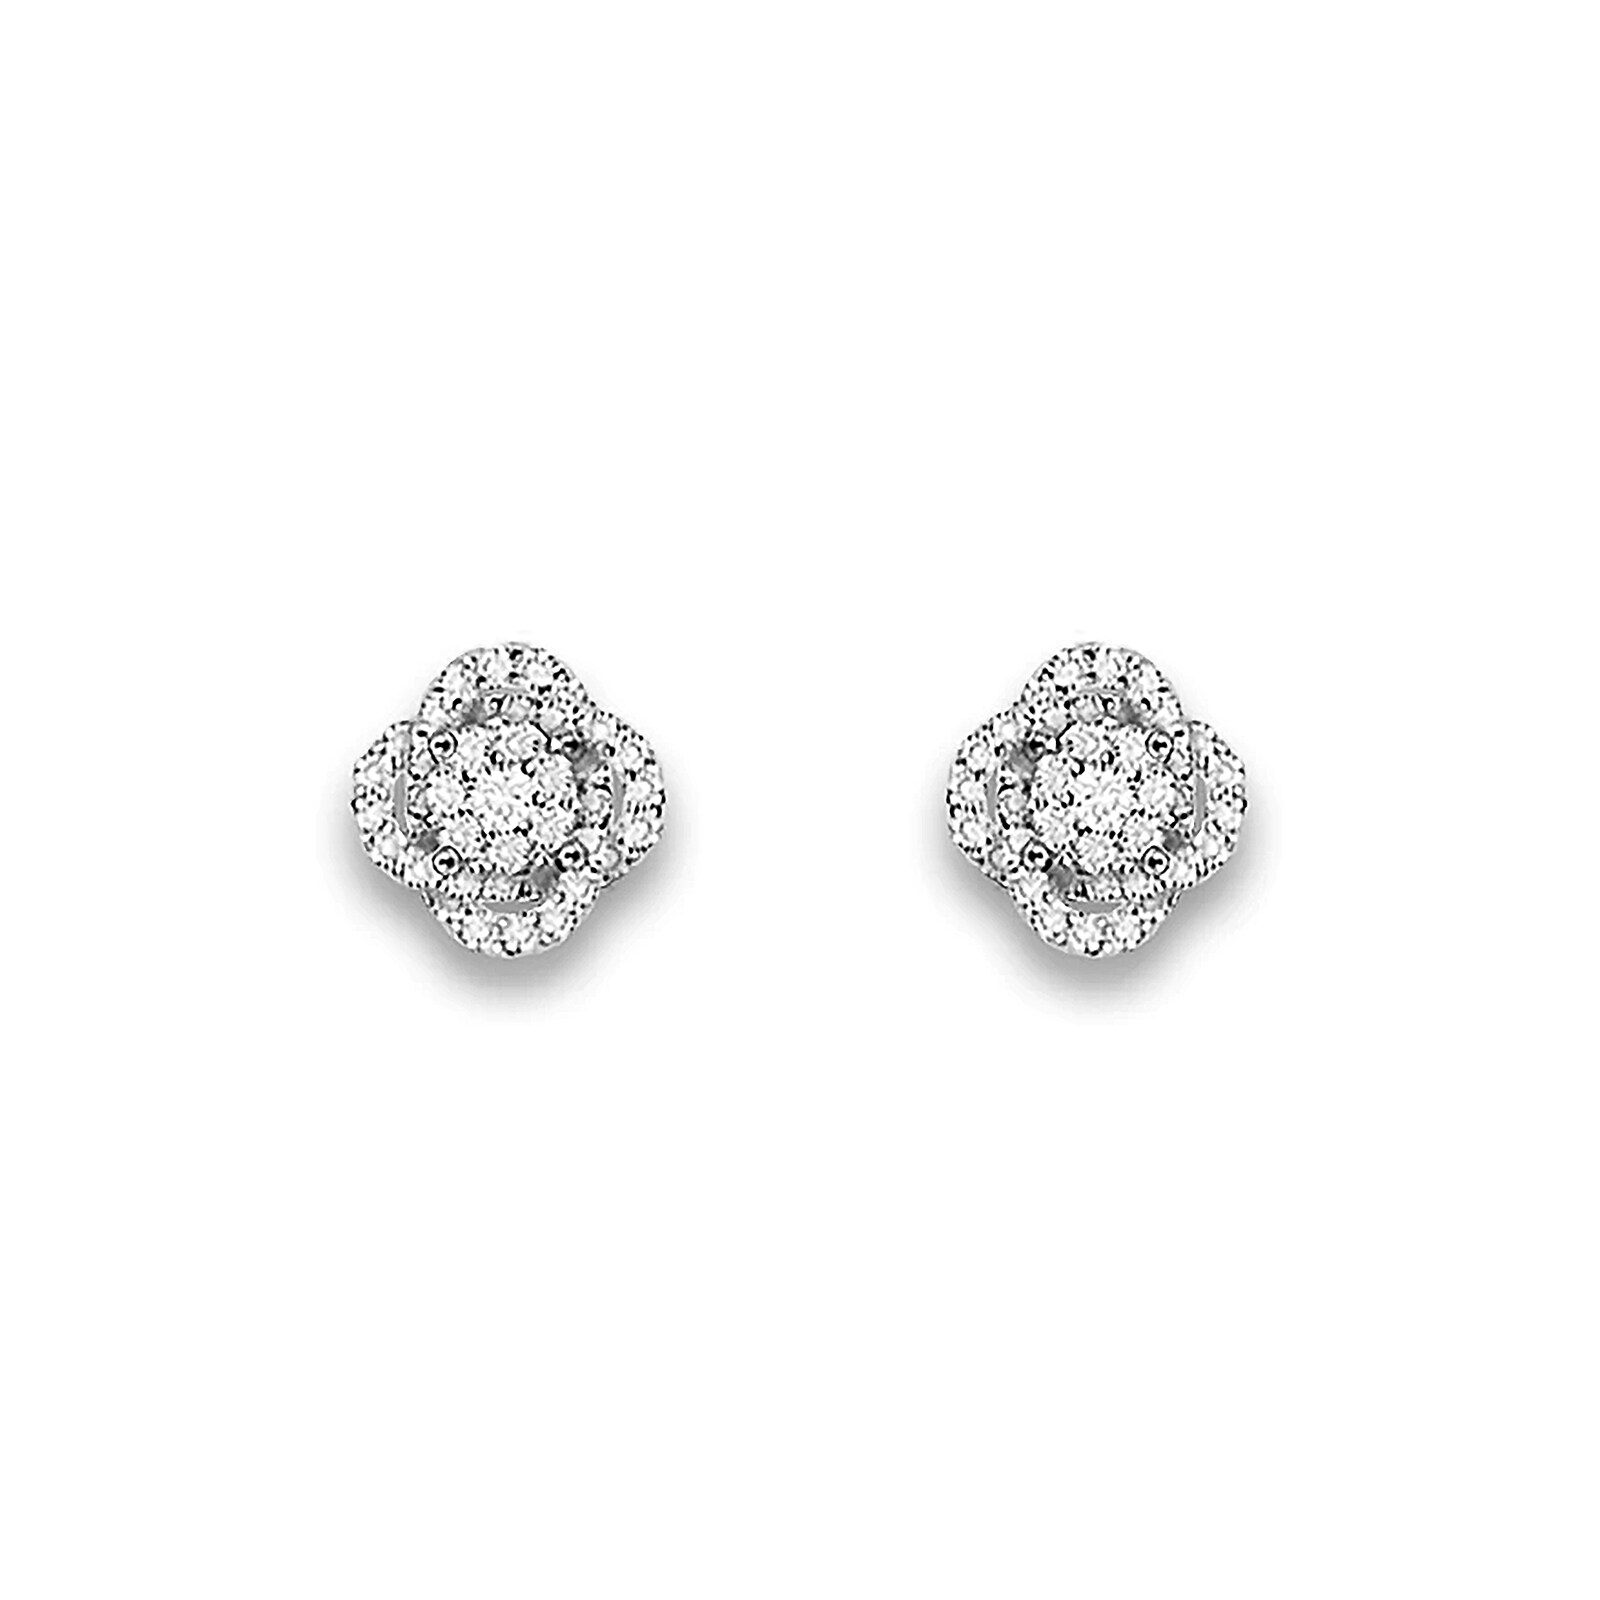 18k White Gold Exclusive Reflector 0.84cttw Diamond Stud Earrings